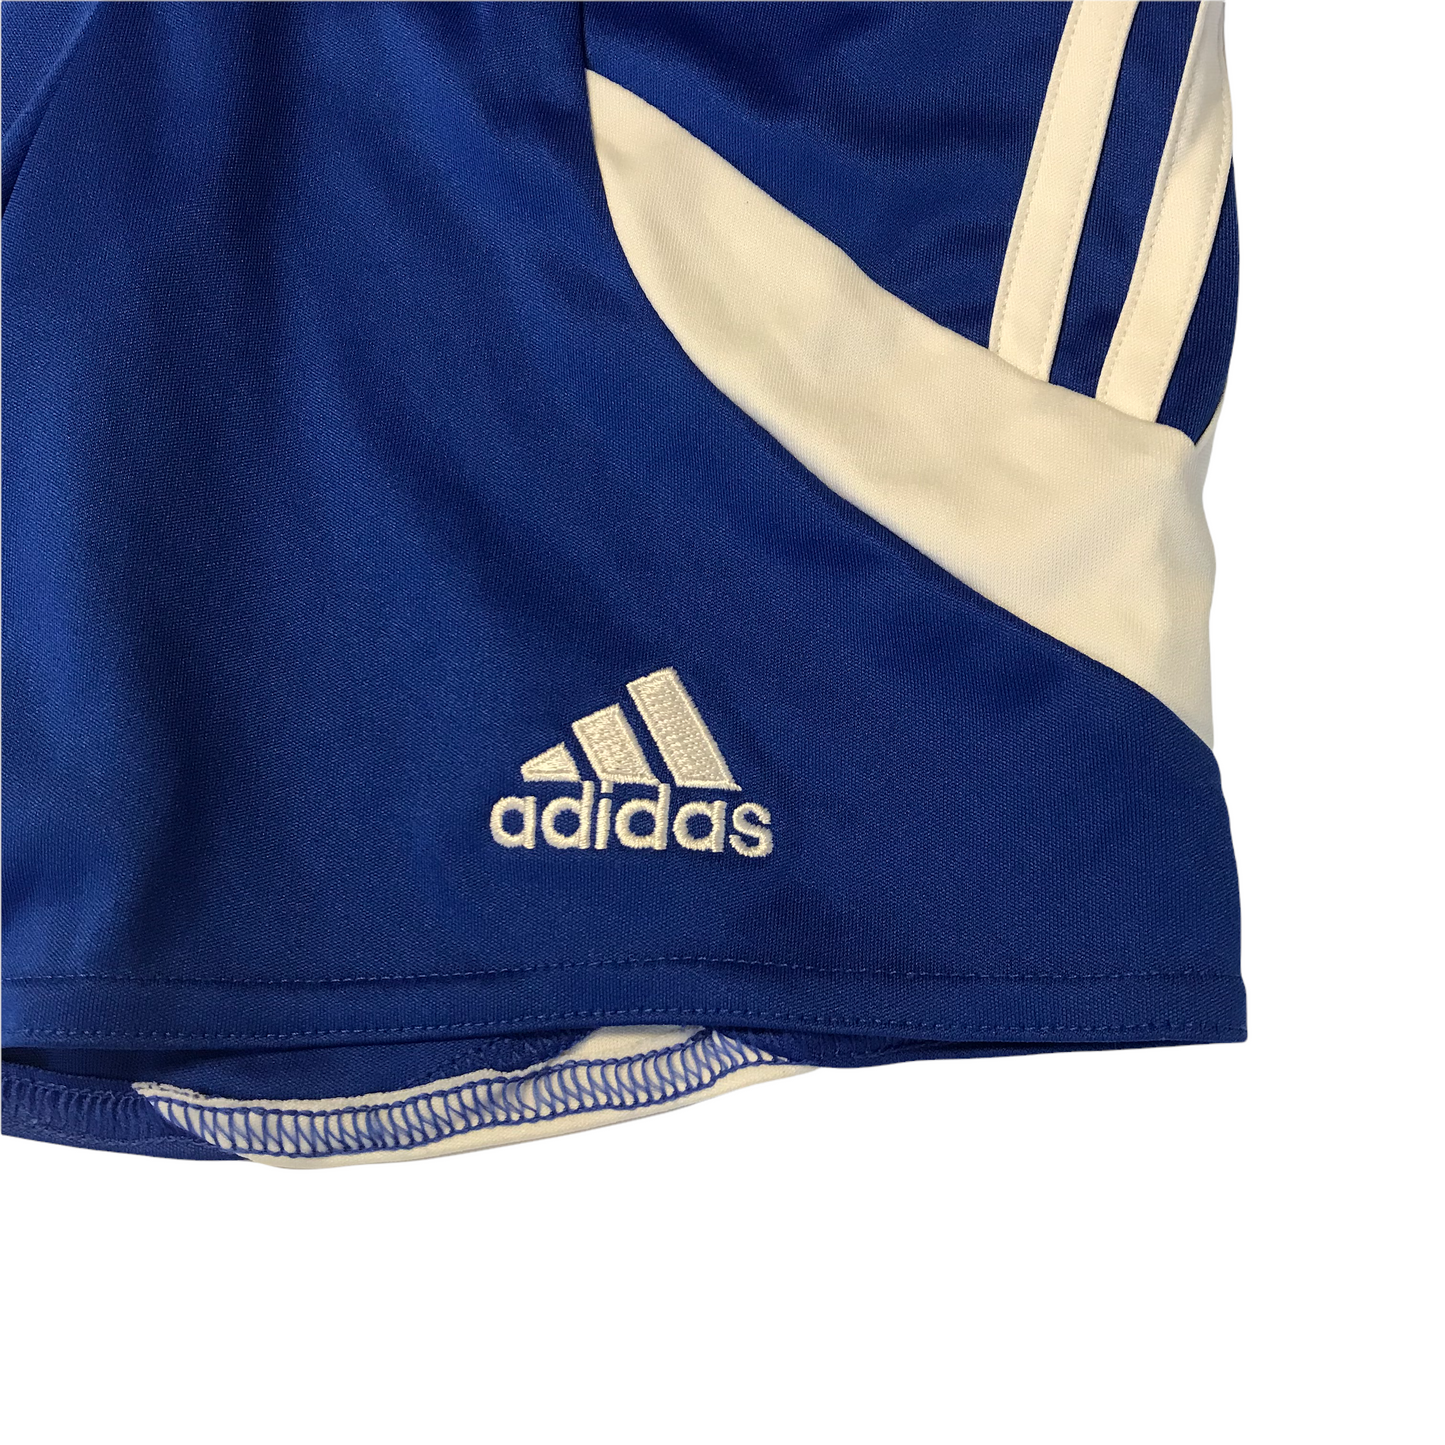 Adidas Blue and White Sport Shorts Age 7